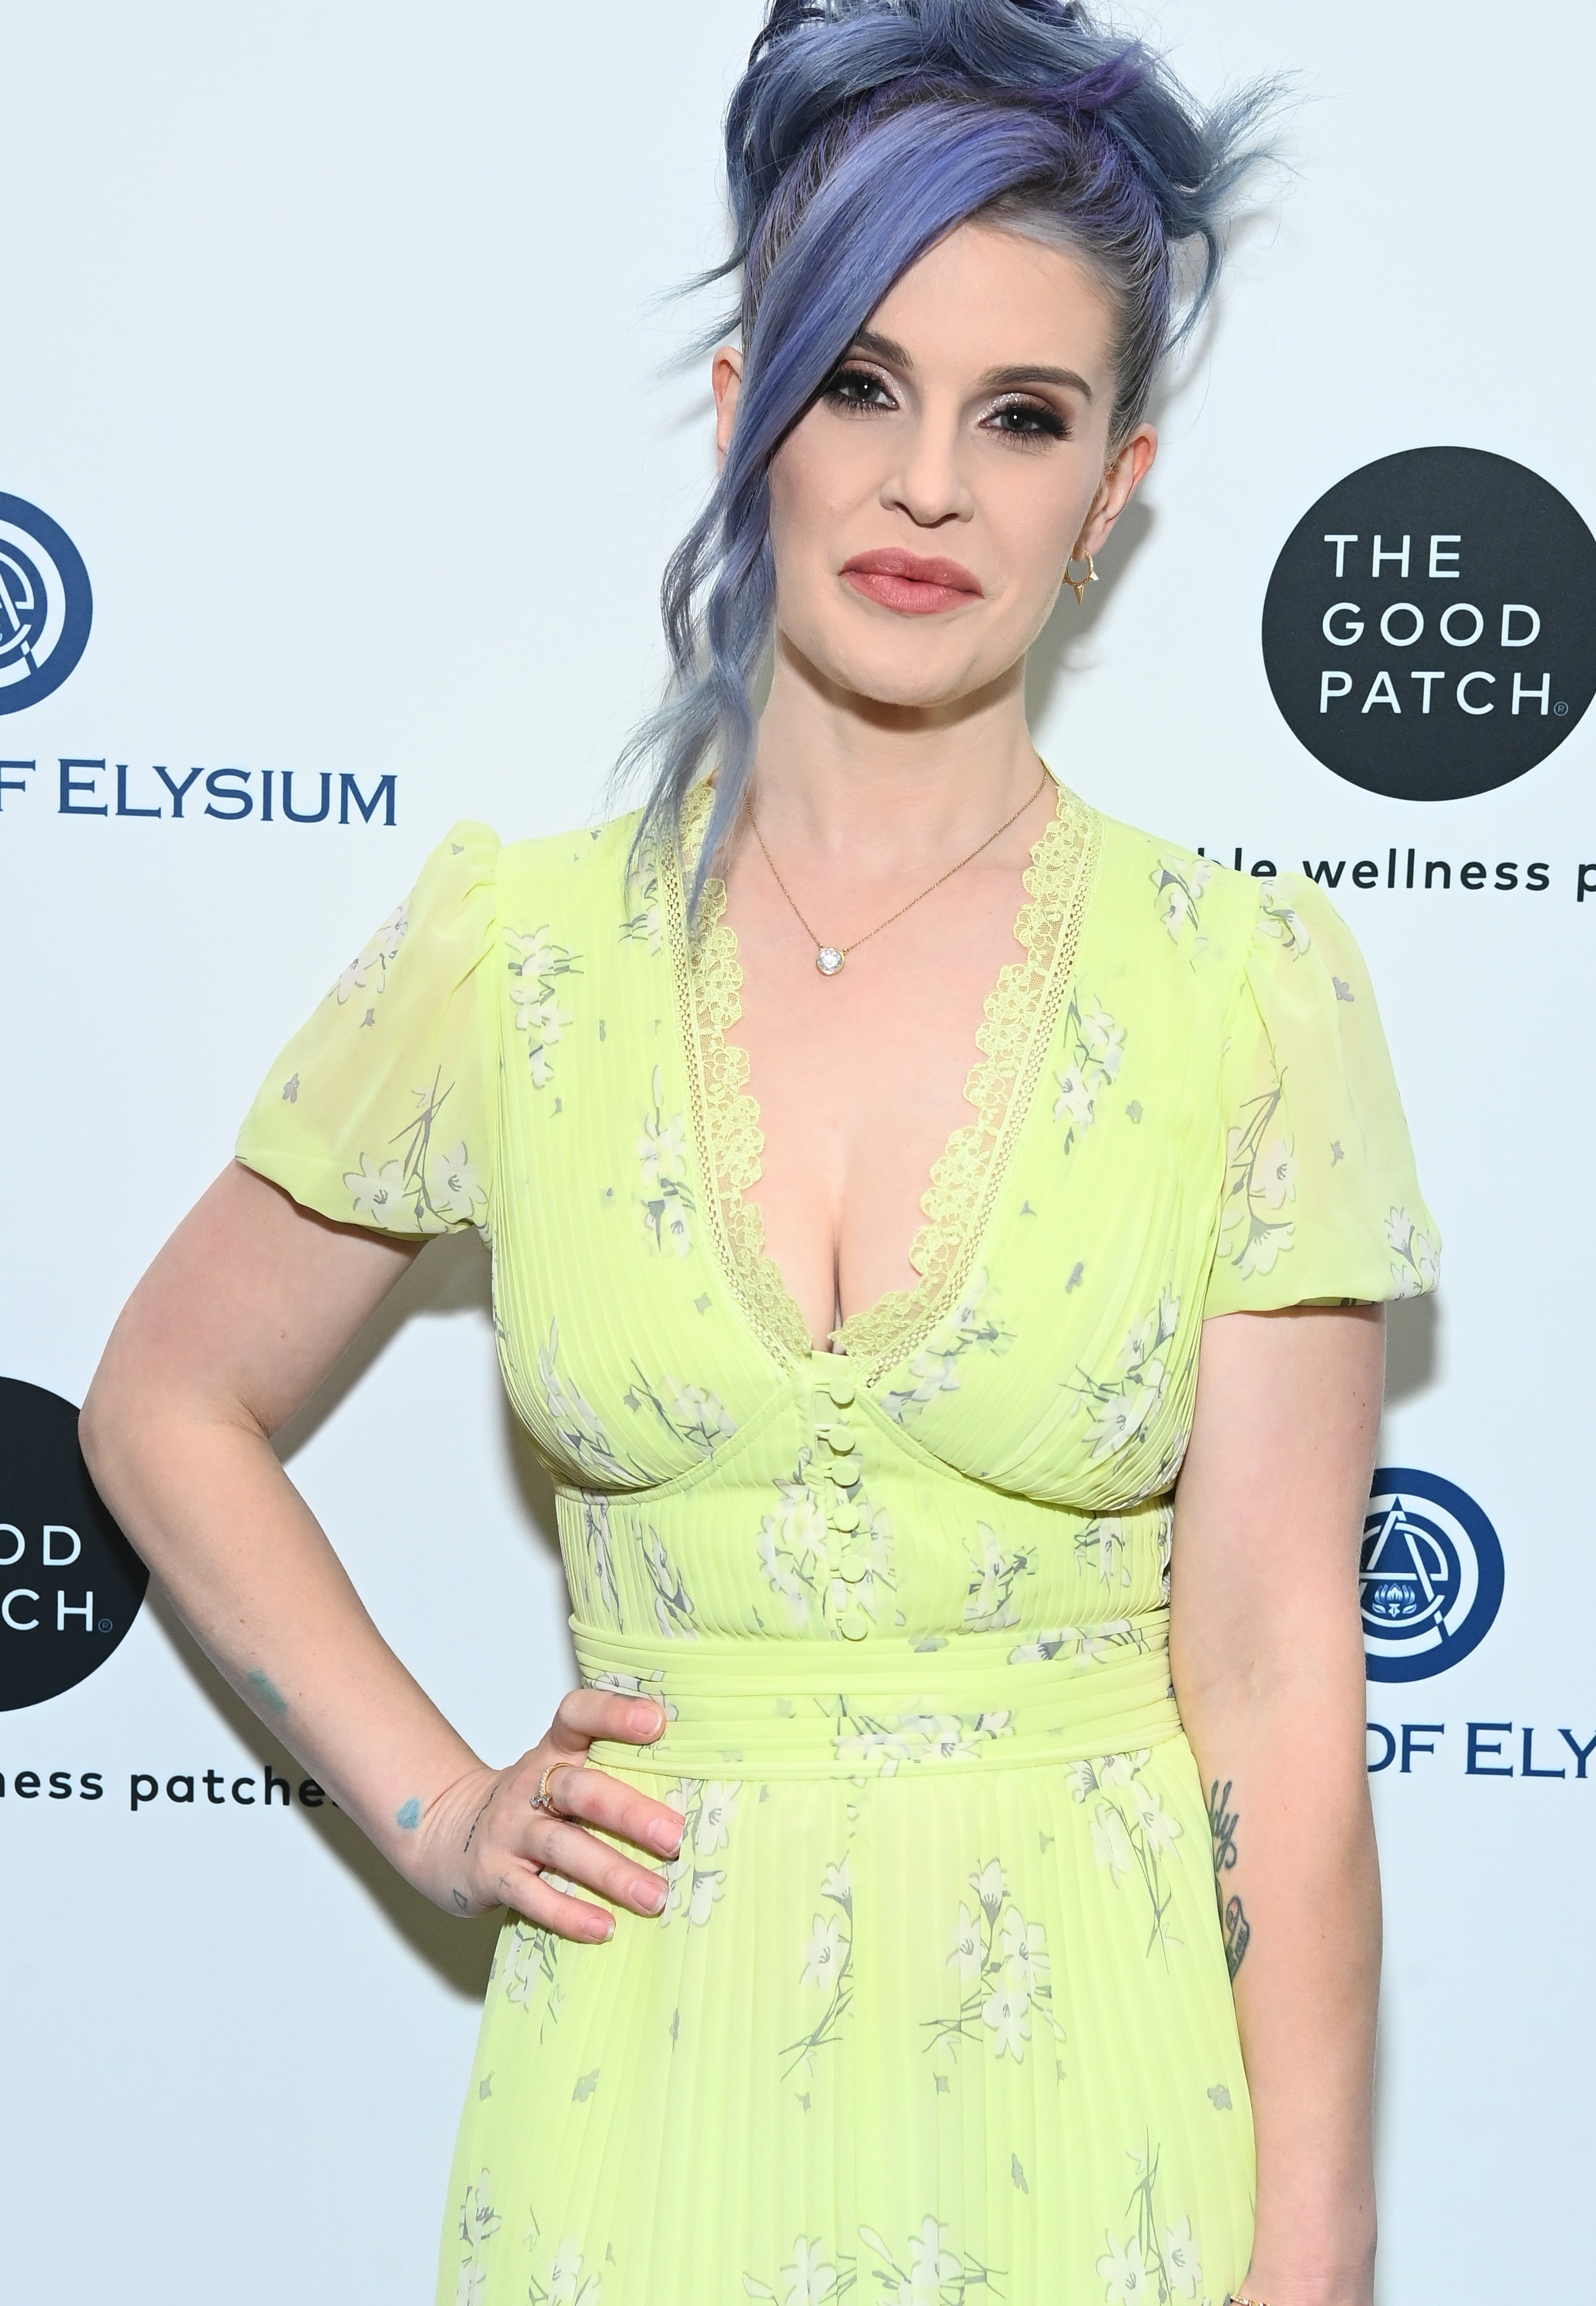 Woman with blue hair styled up, wearing a light yellow, floral dress, at The Art of Elysium event